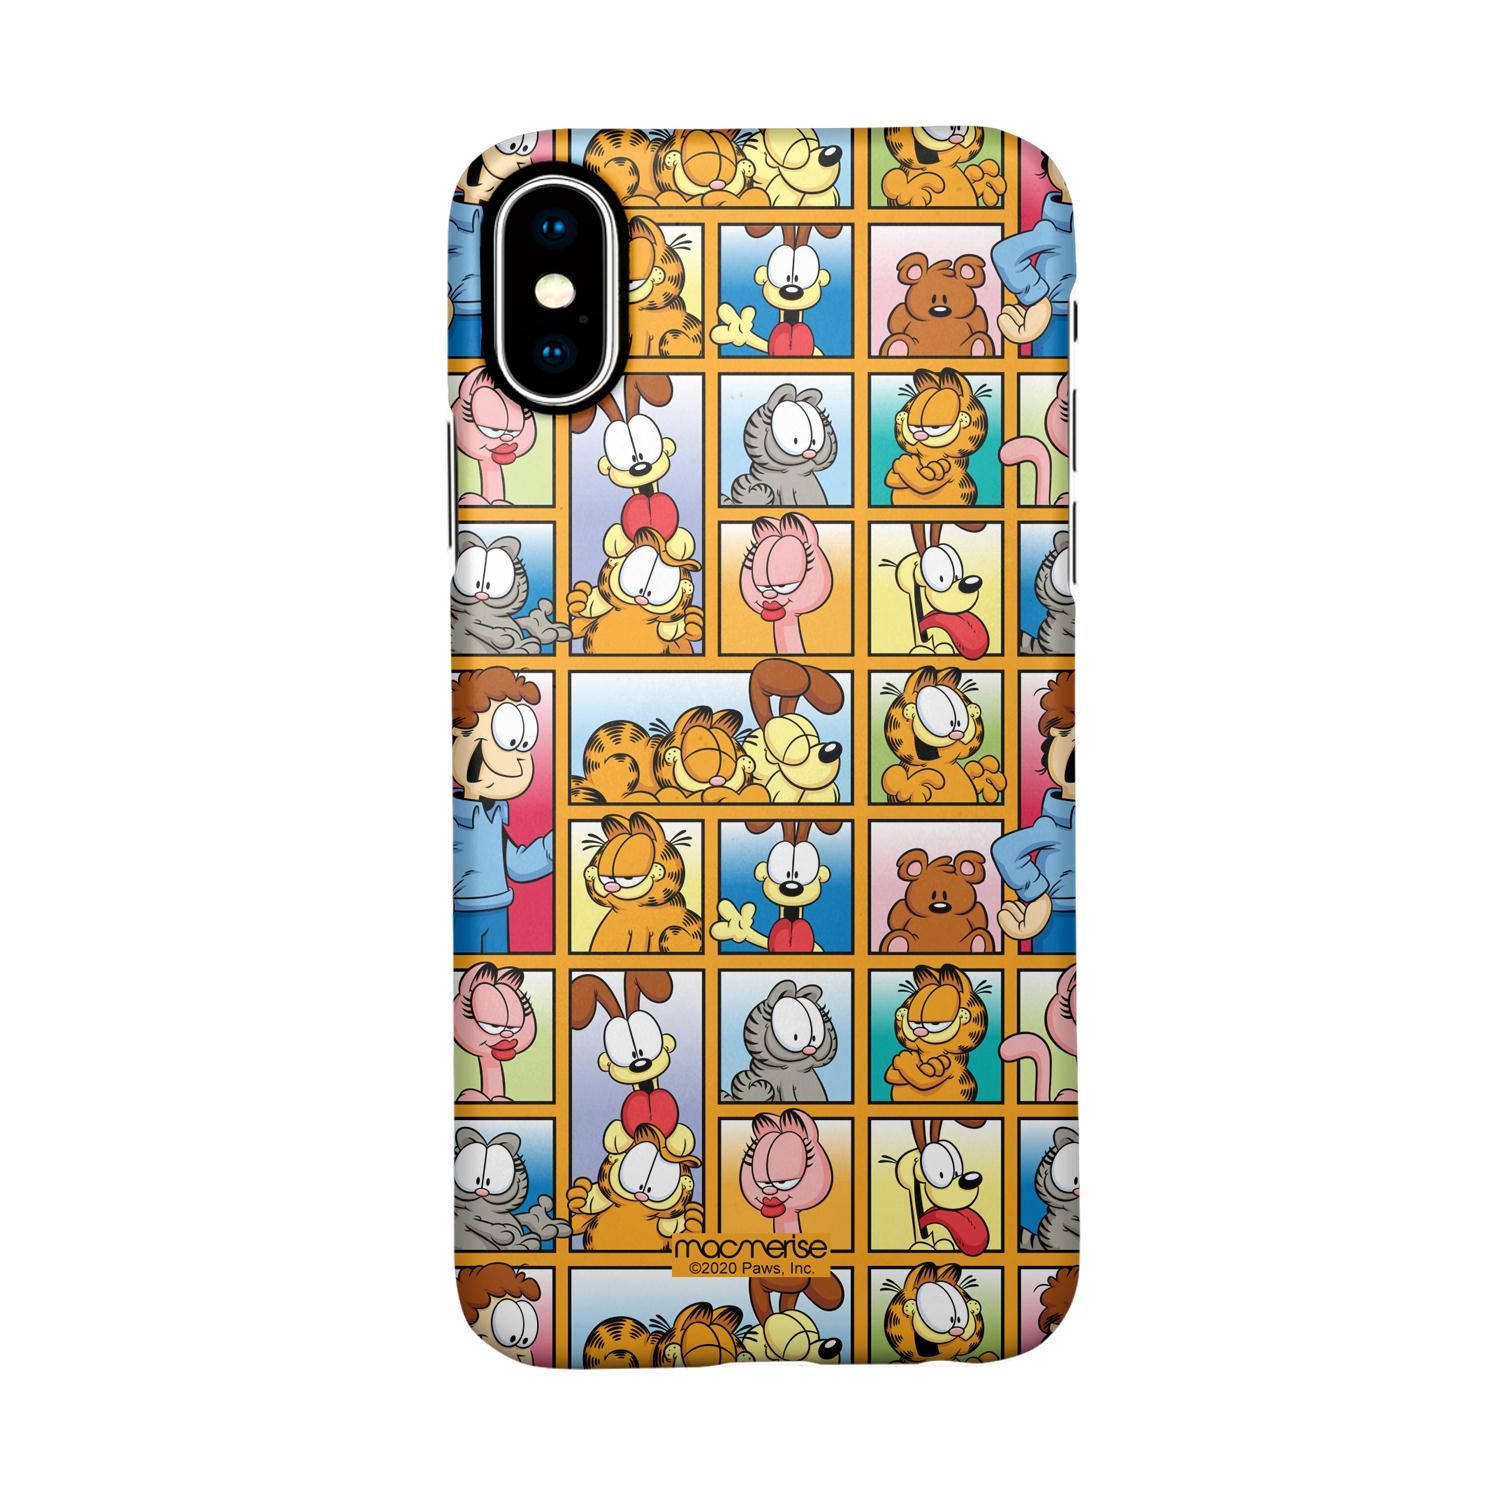 Garfield Collage - Sleek Case for iPhone XS